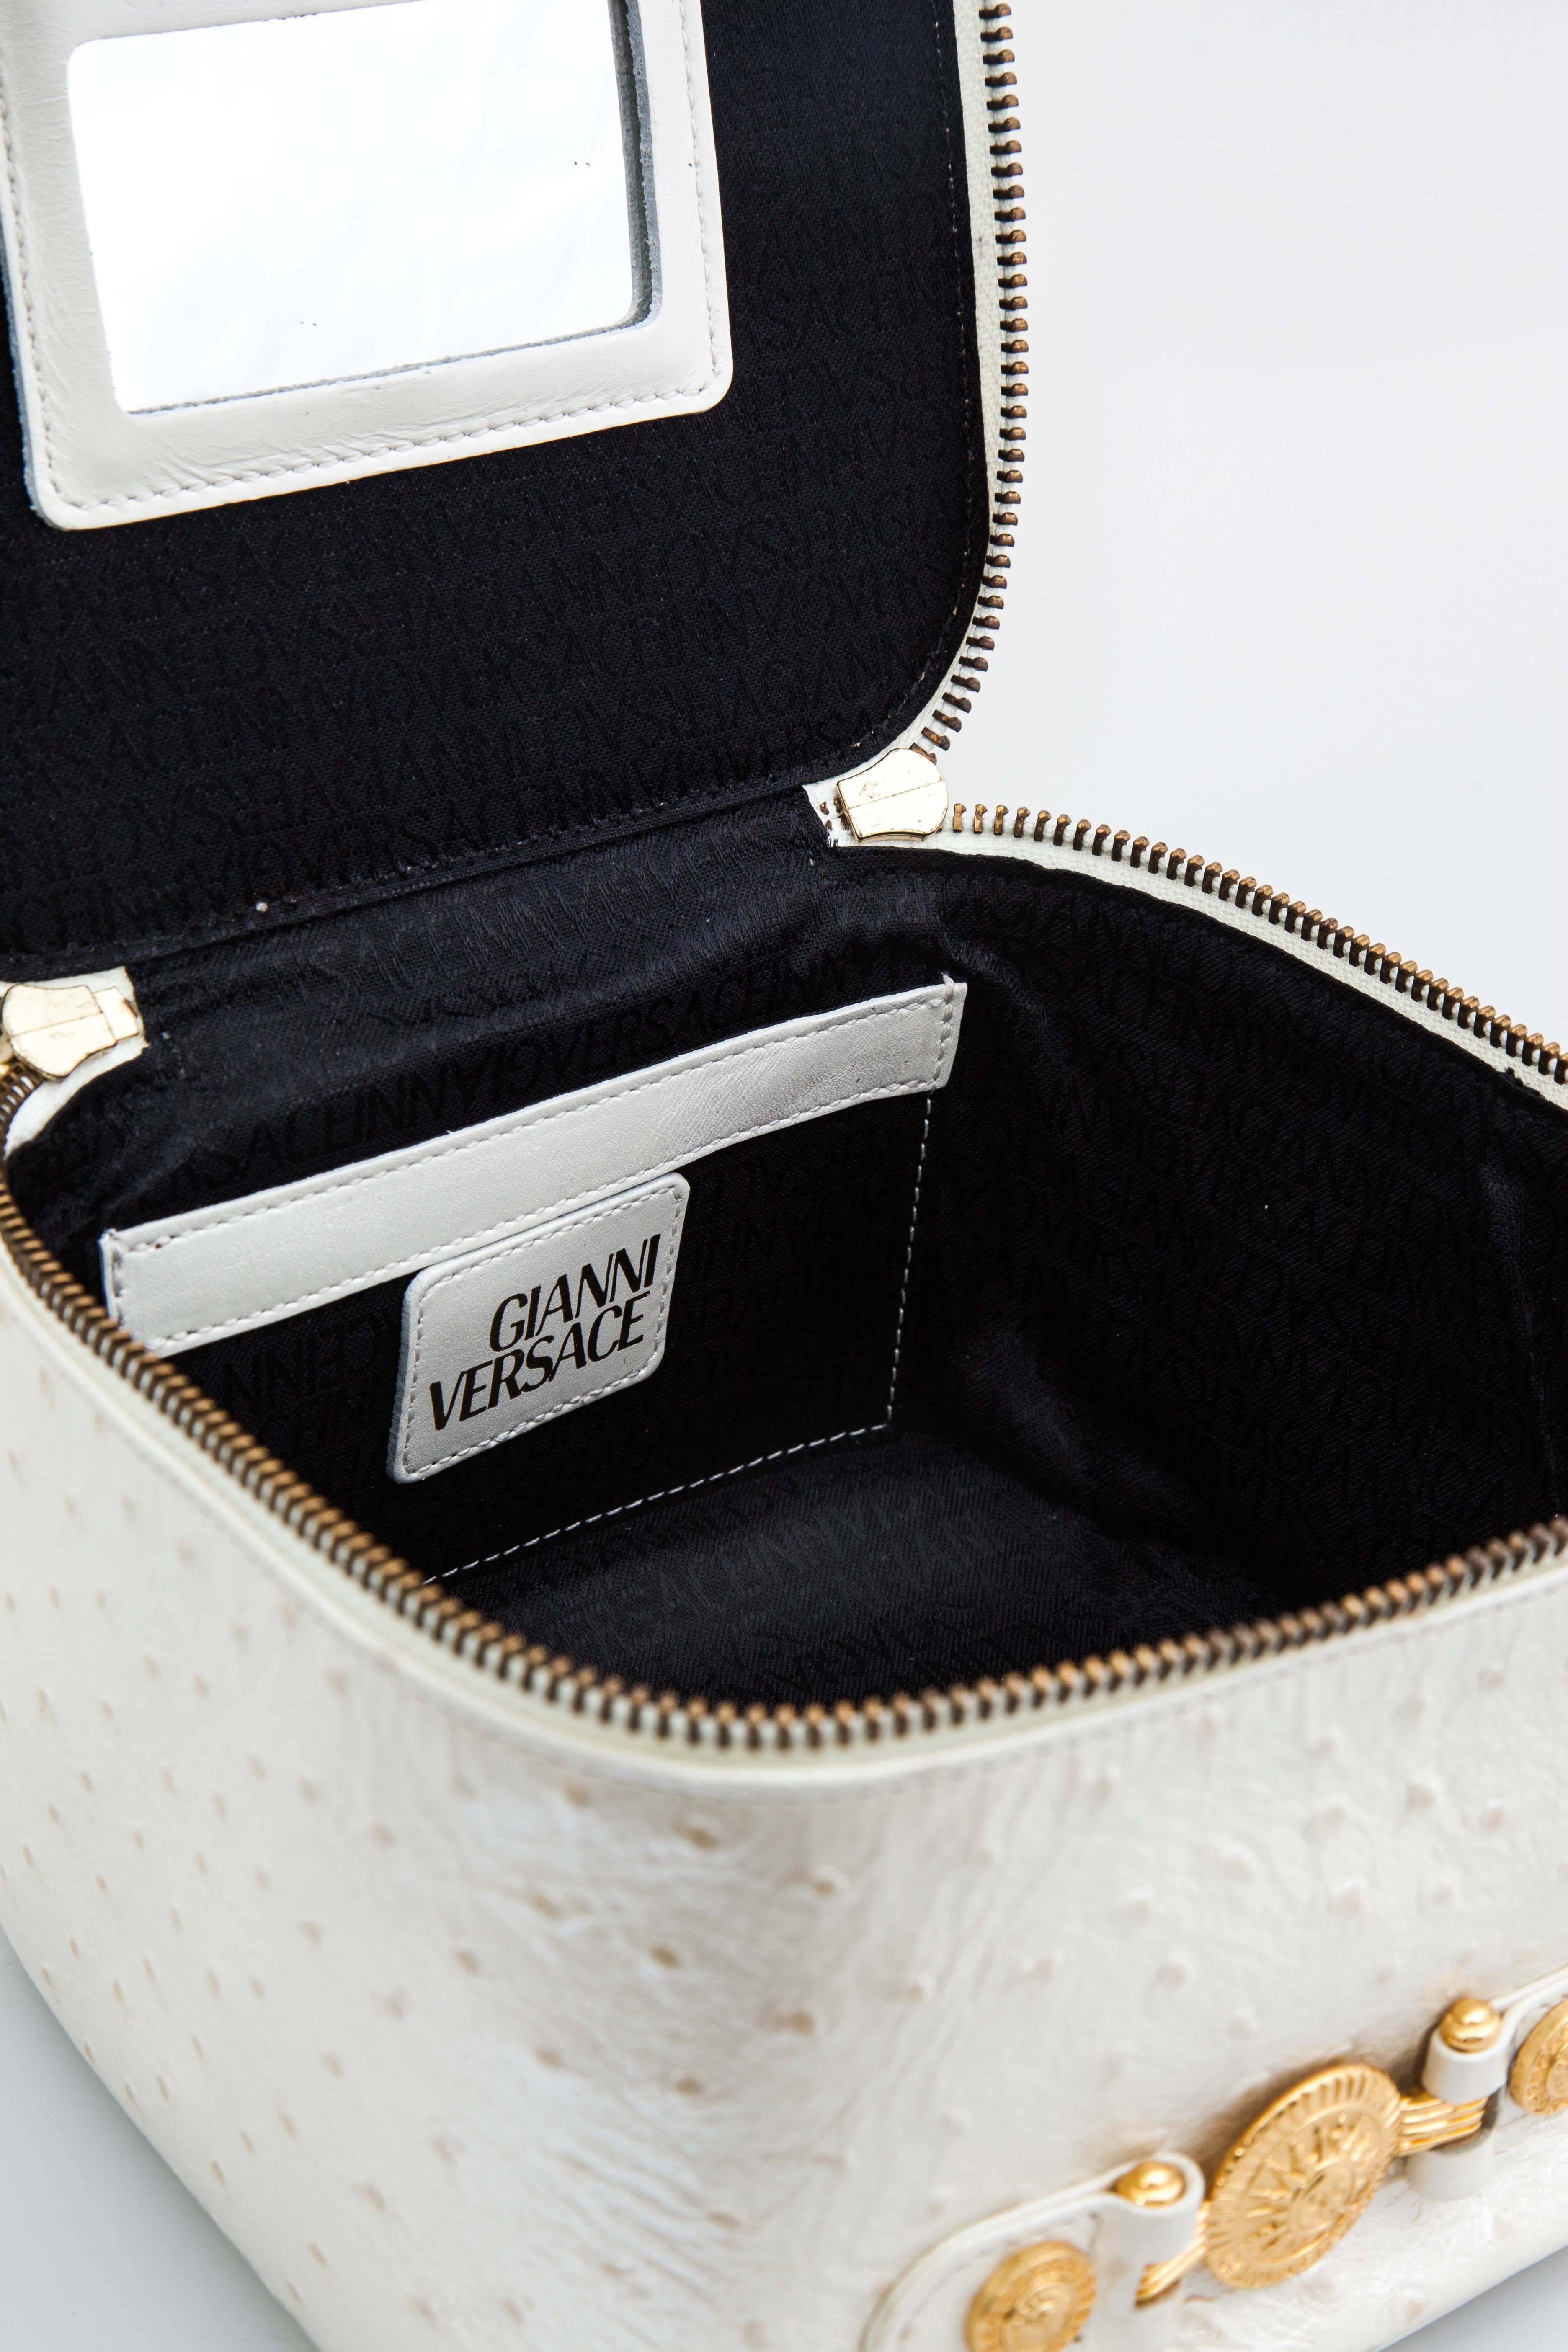 Versace White Faux Ostrich Vanity Case Bag For Sale 4